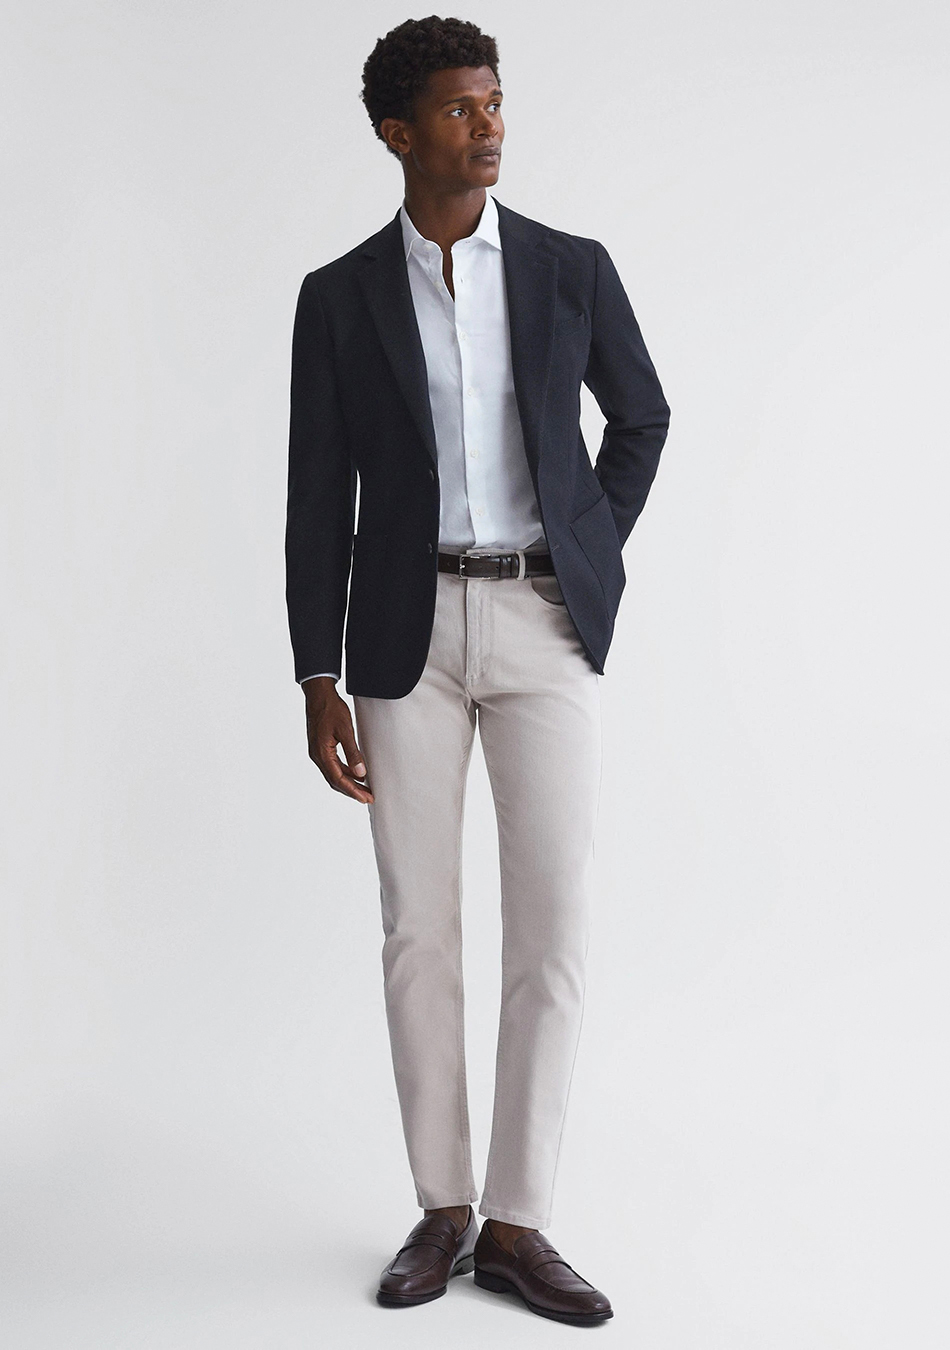 Navy blazer, white dress shirt, light grey jeans, and brown loafers